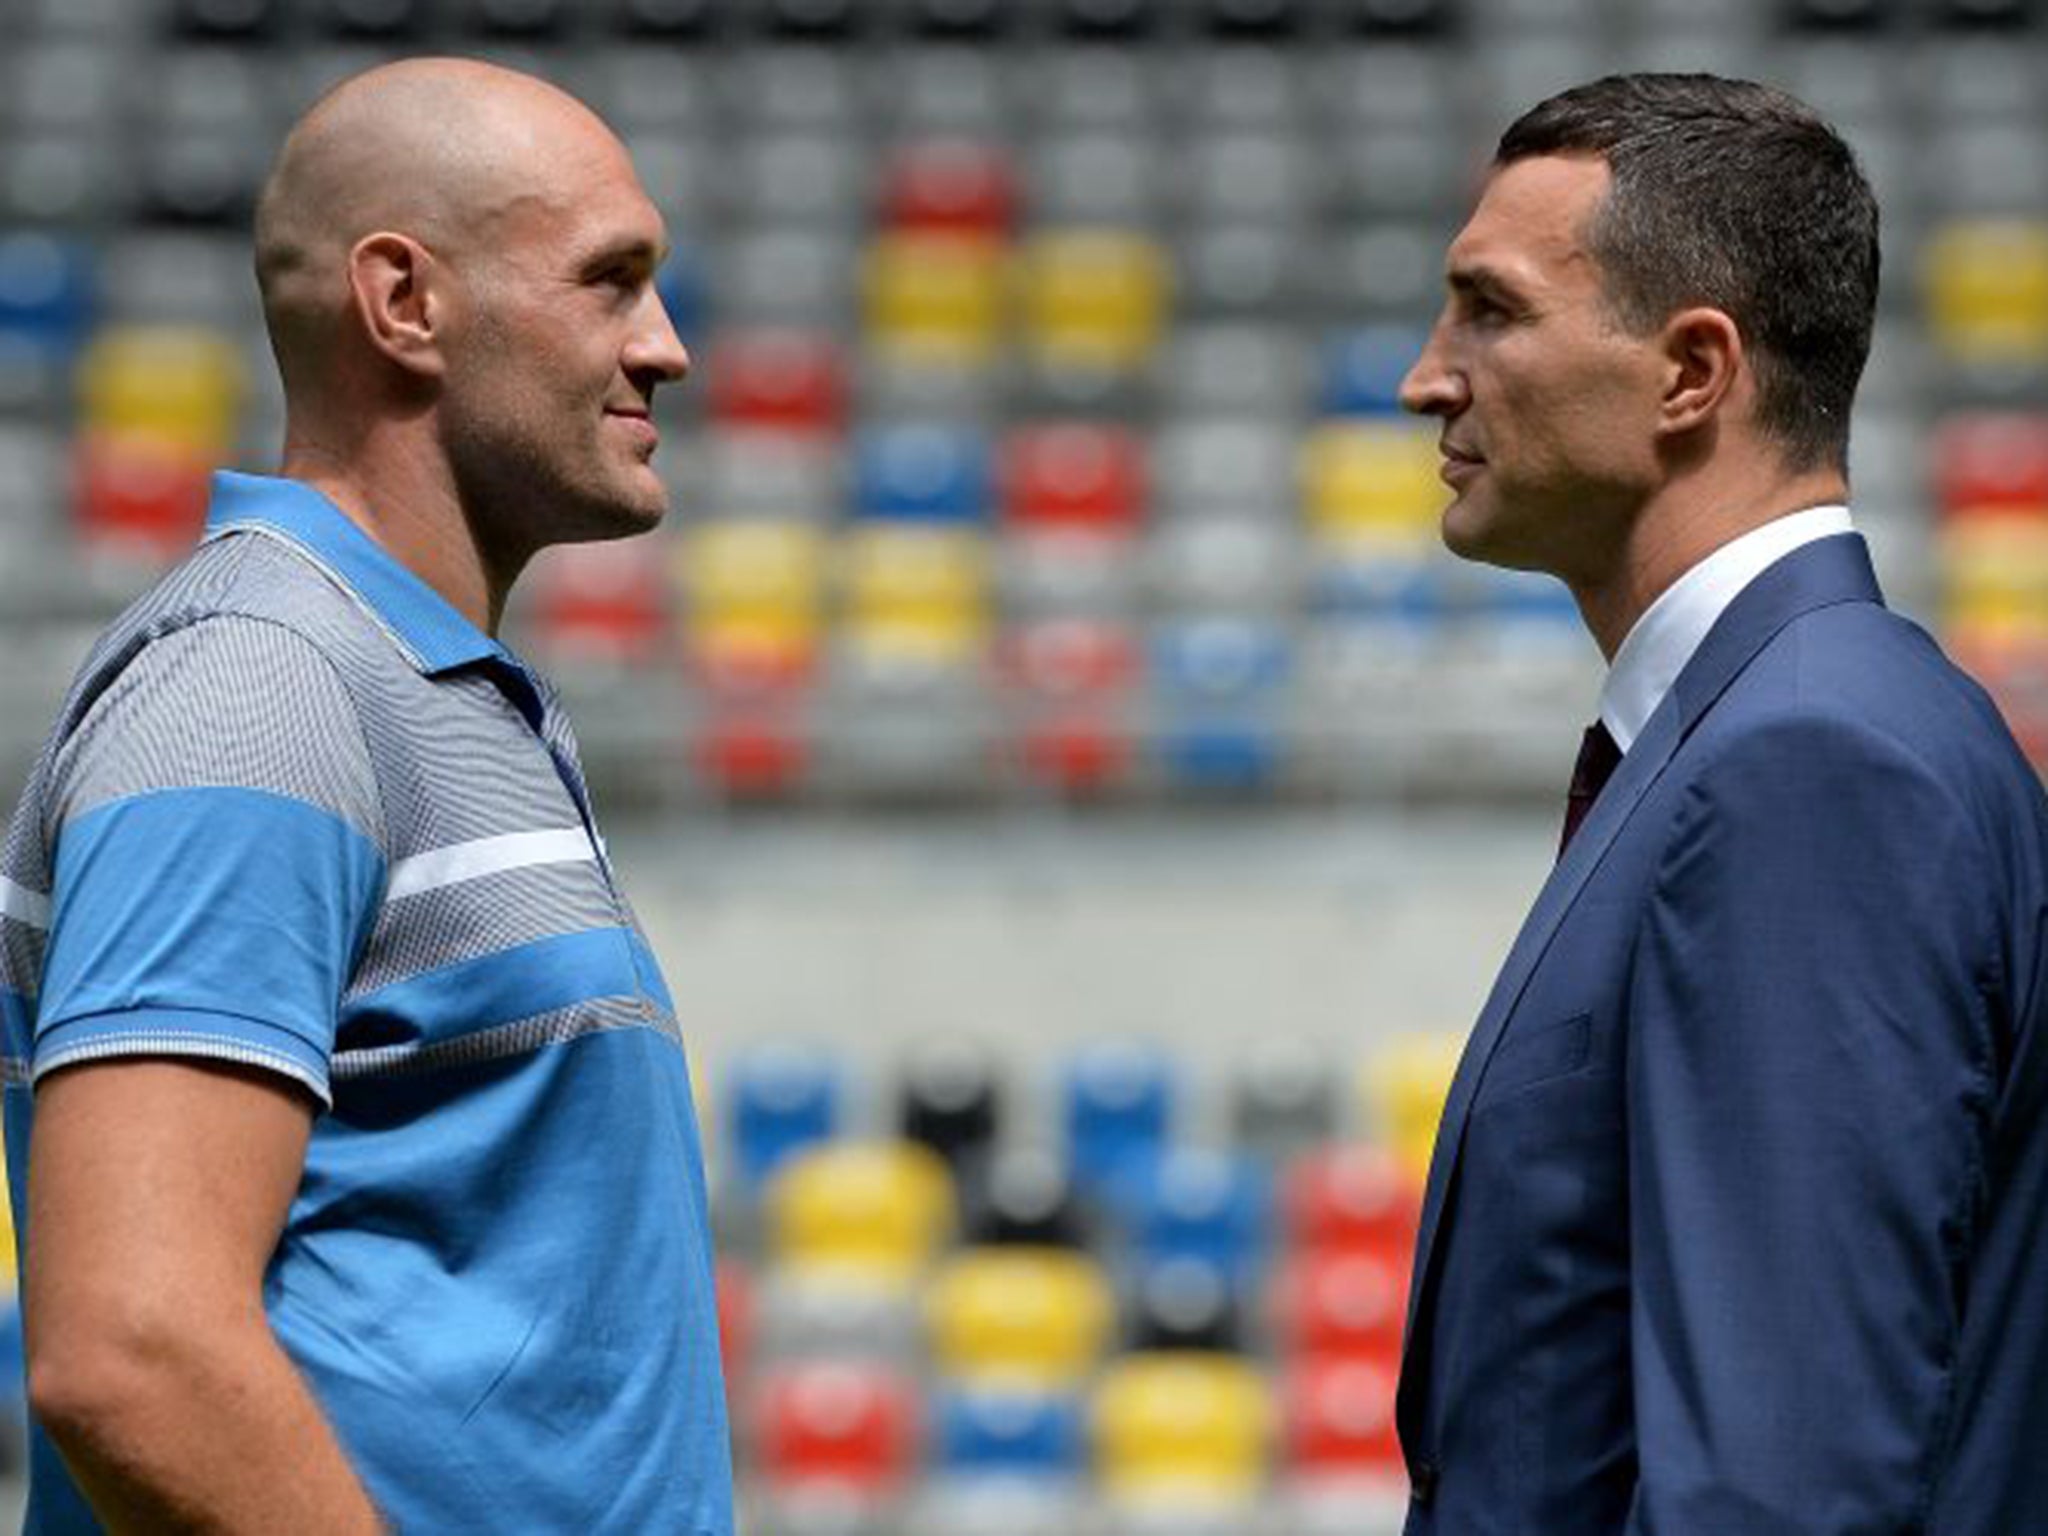 Tyson Fury, left, is adamant that age will work against the 39-year-old Klitschko when they meet (Getty)